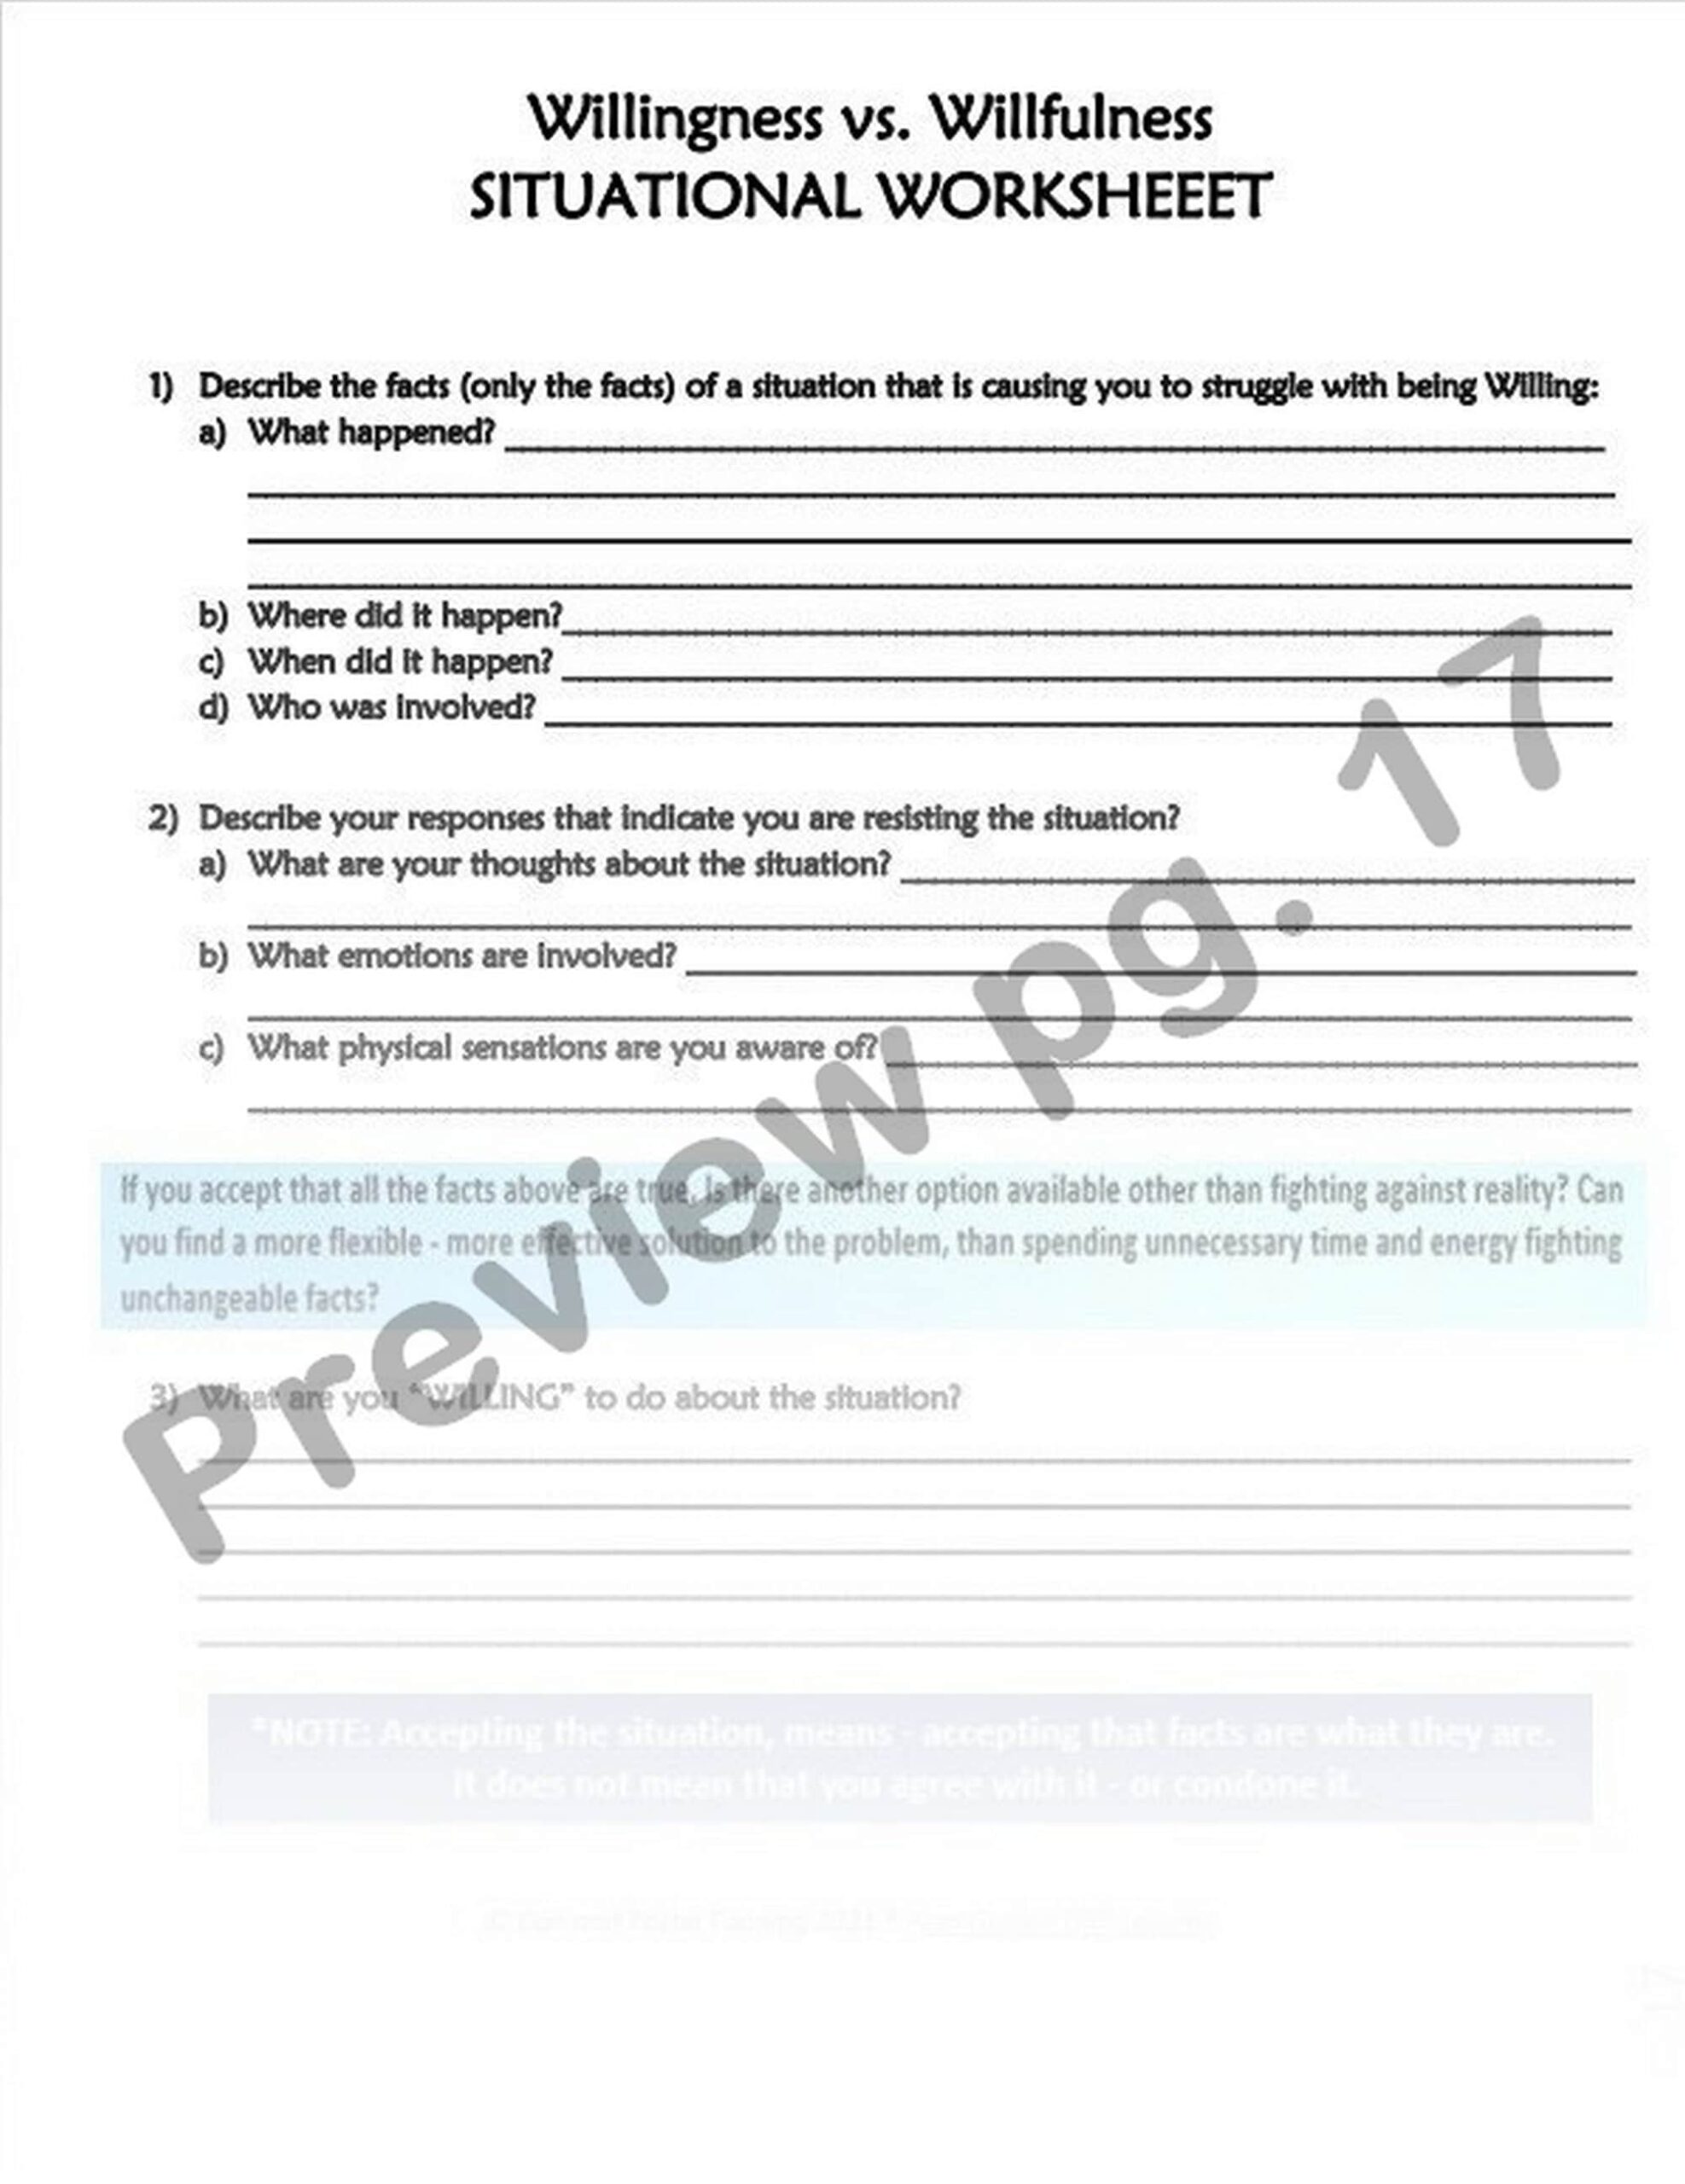 DBT LESSON 2 8 Willingness Vs Willfulness Worksheets And Handouts DBT Peer Guided Lessons Etsy